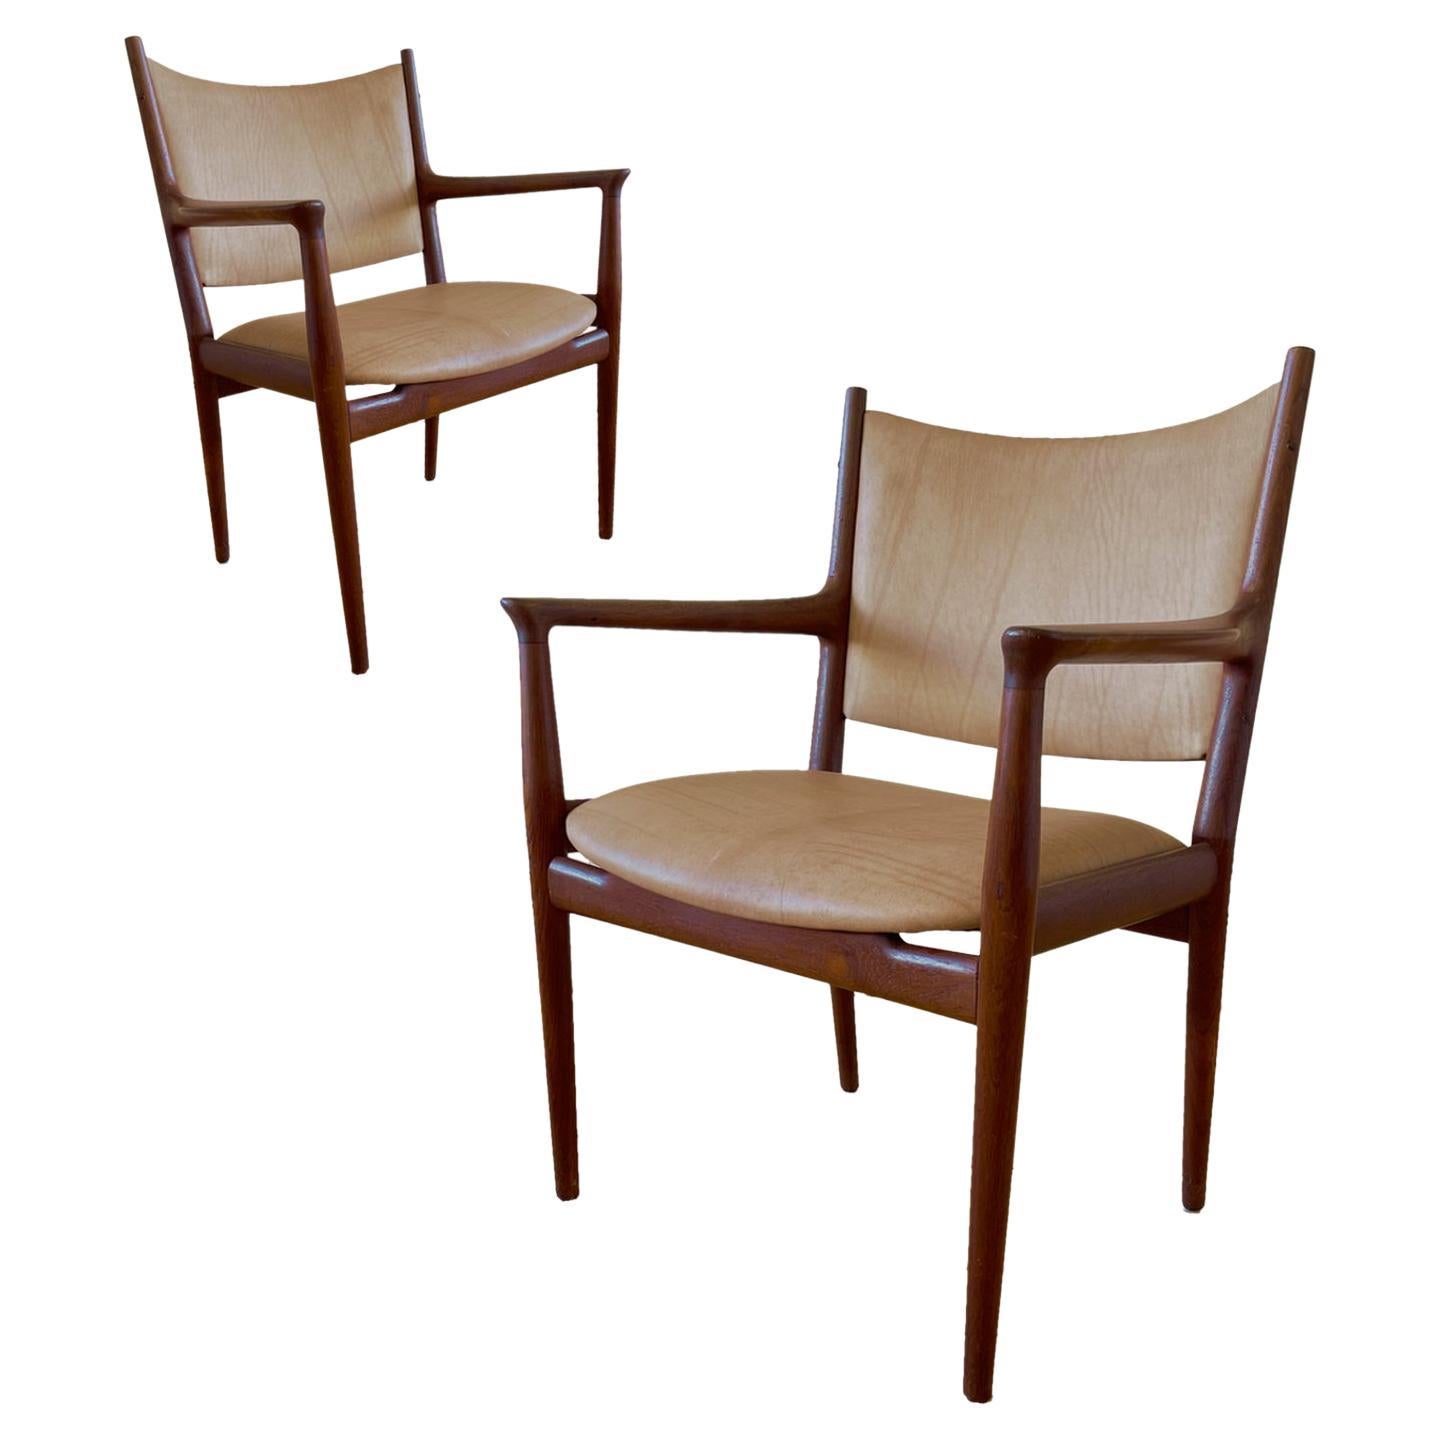 Pair of Early Hans Wegner for Johannes Hansen JH-513 Armchairs, 2 Pair available